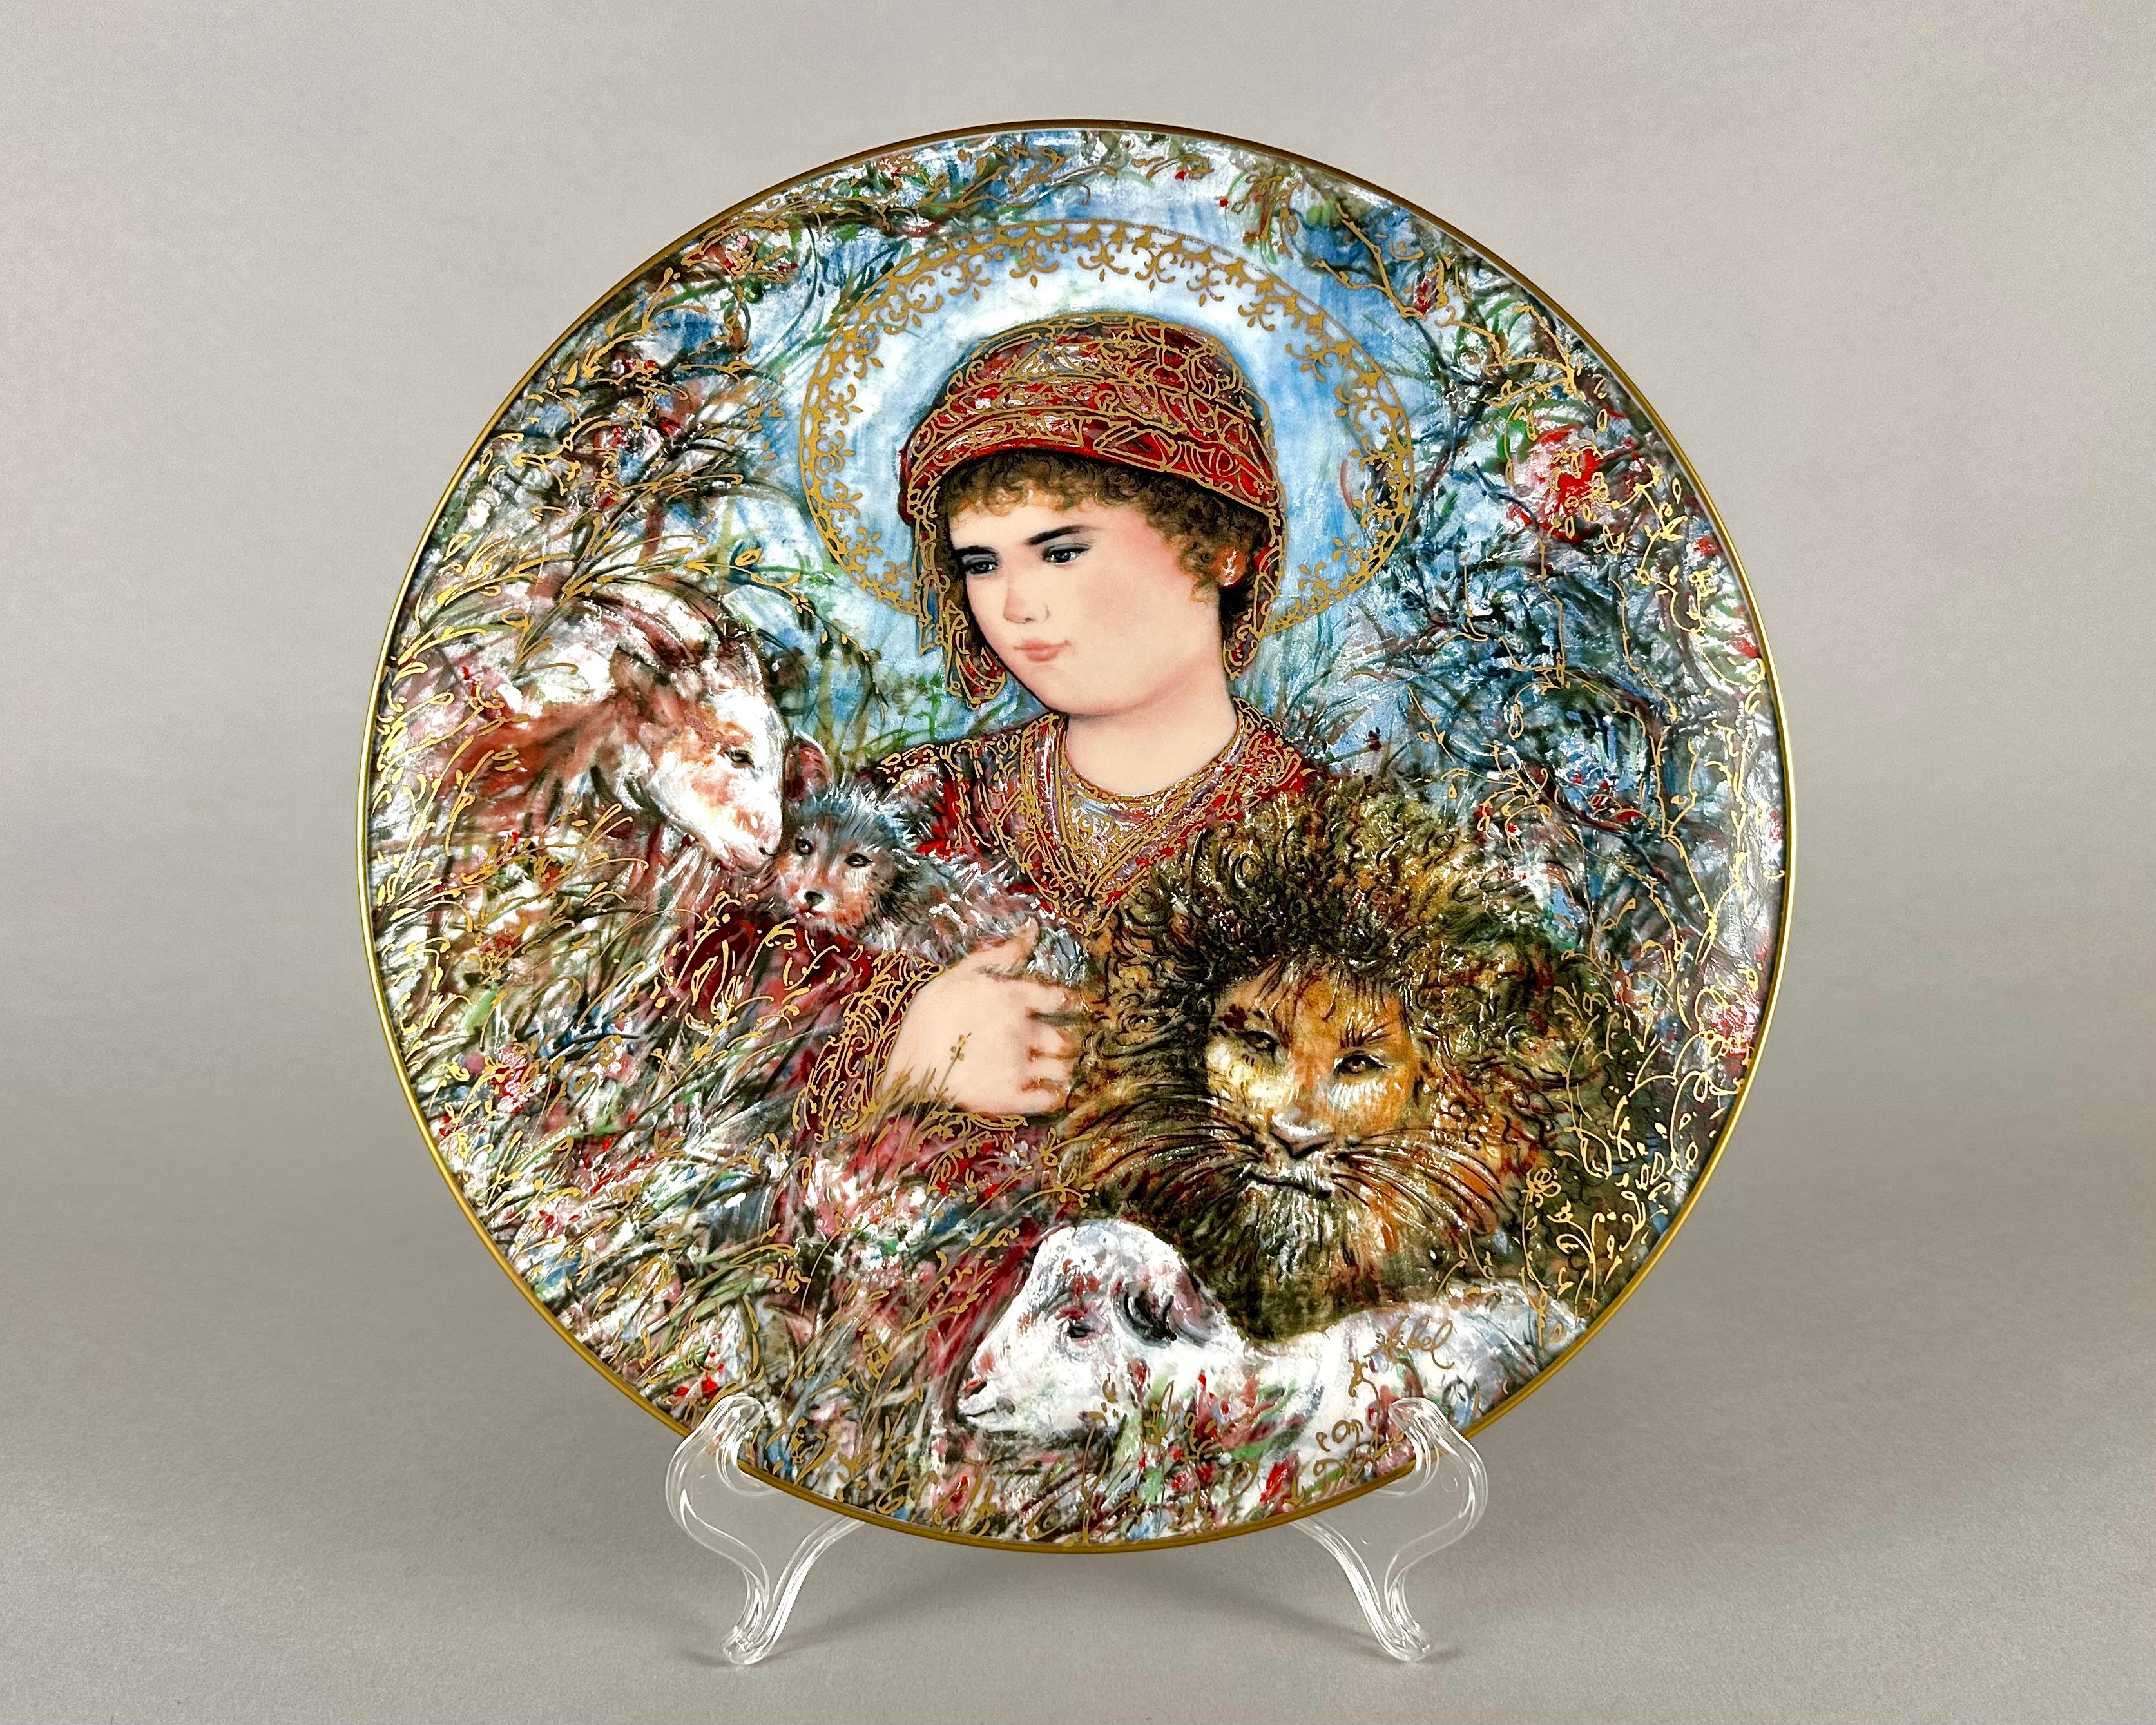 This lot includes three different plates, from 1985-89, the first plate collection created by Edna Hibel, produced by Knowles.

All plates have hand applied gold to the rim. Beautiful and vibrant colors throughout. 

Each plate comes in the original